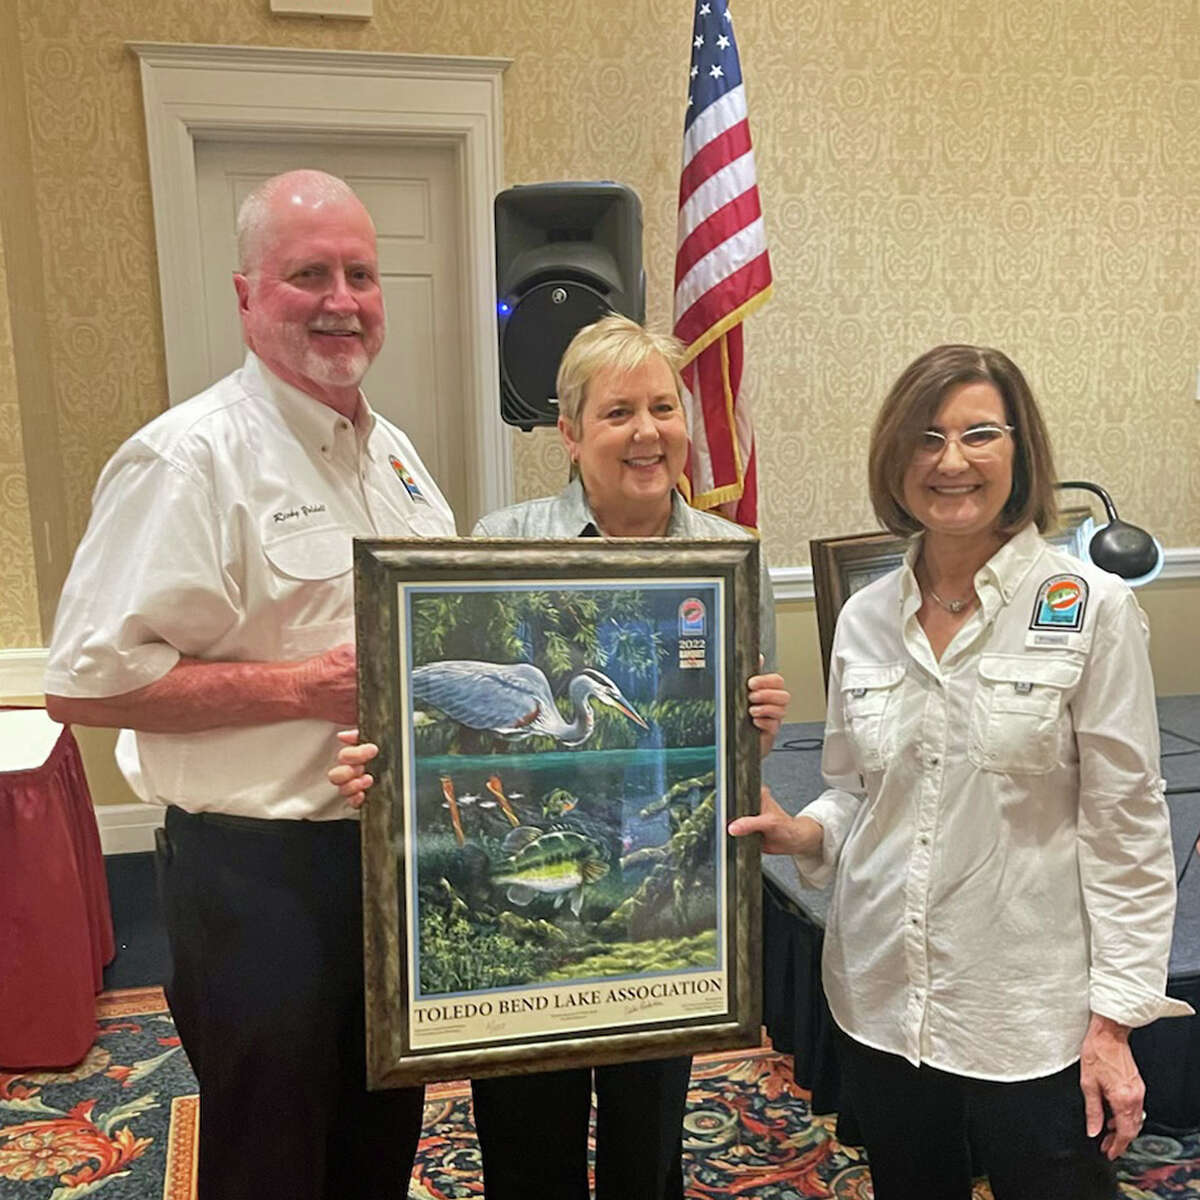 Dayna Yeldell, Owner/Broker of First Choice Real Estate Services and this year’s poster sponsor, is presented with the number two poster by Carolyn Scheurich, poster unveiling chairman. Pictured from left is Ricky and Dayna Yeldell, Carolyn Scheurich.